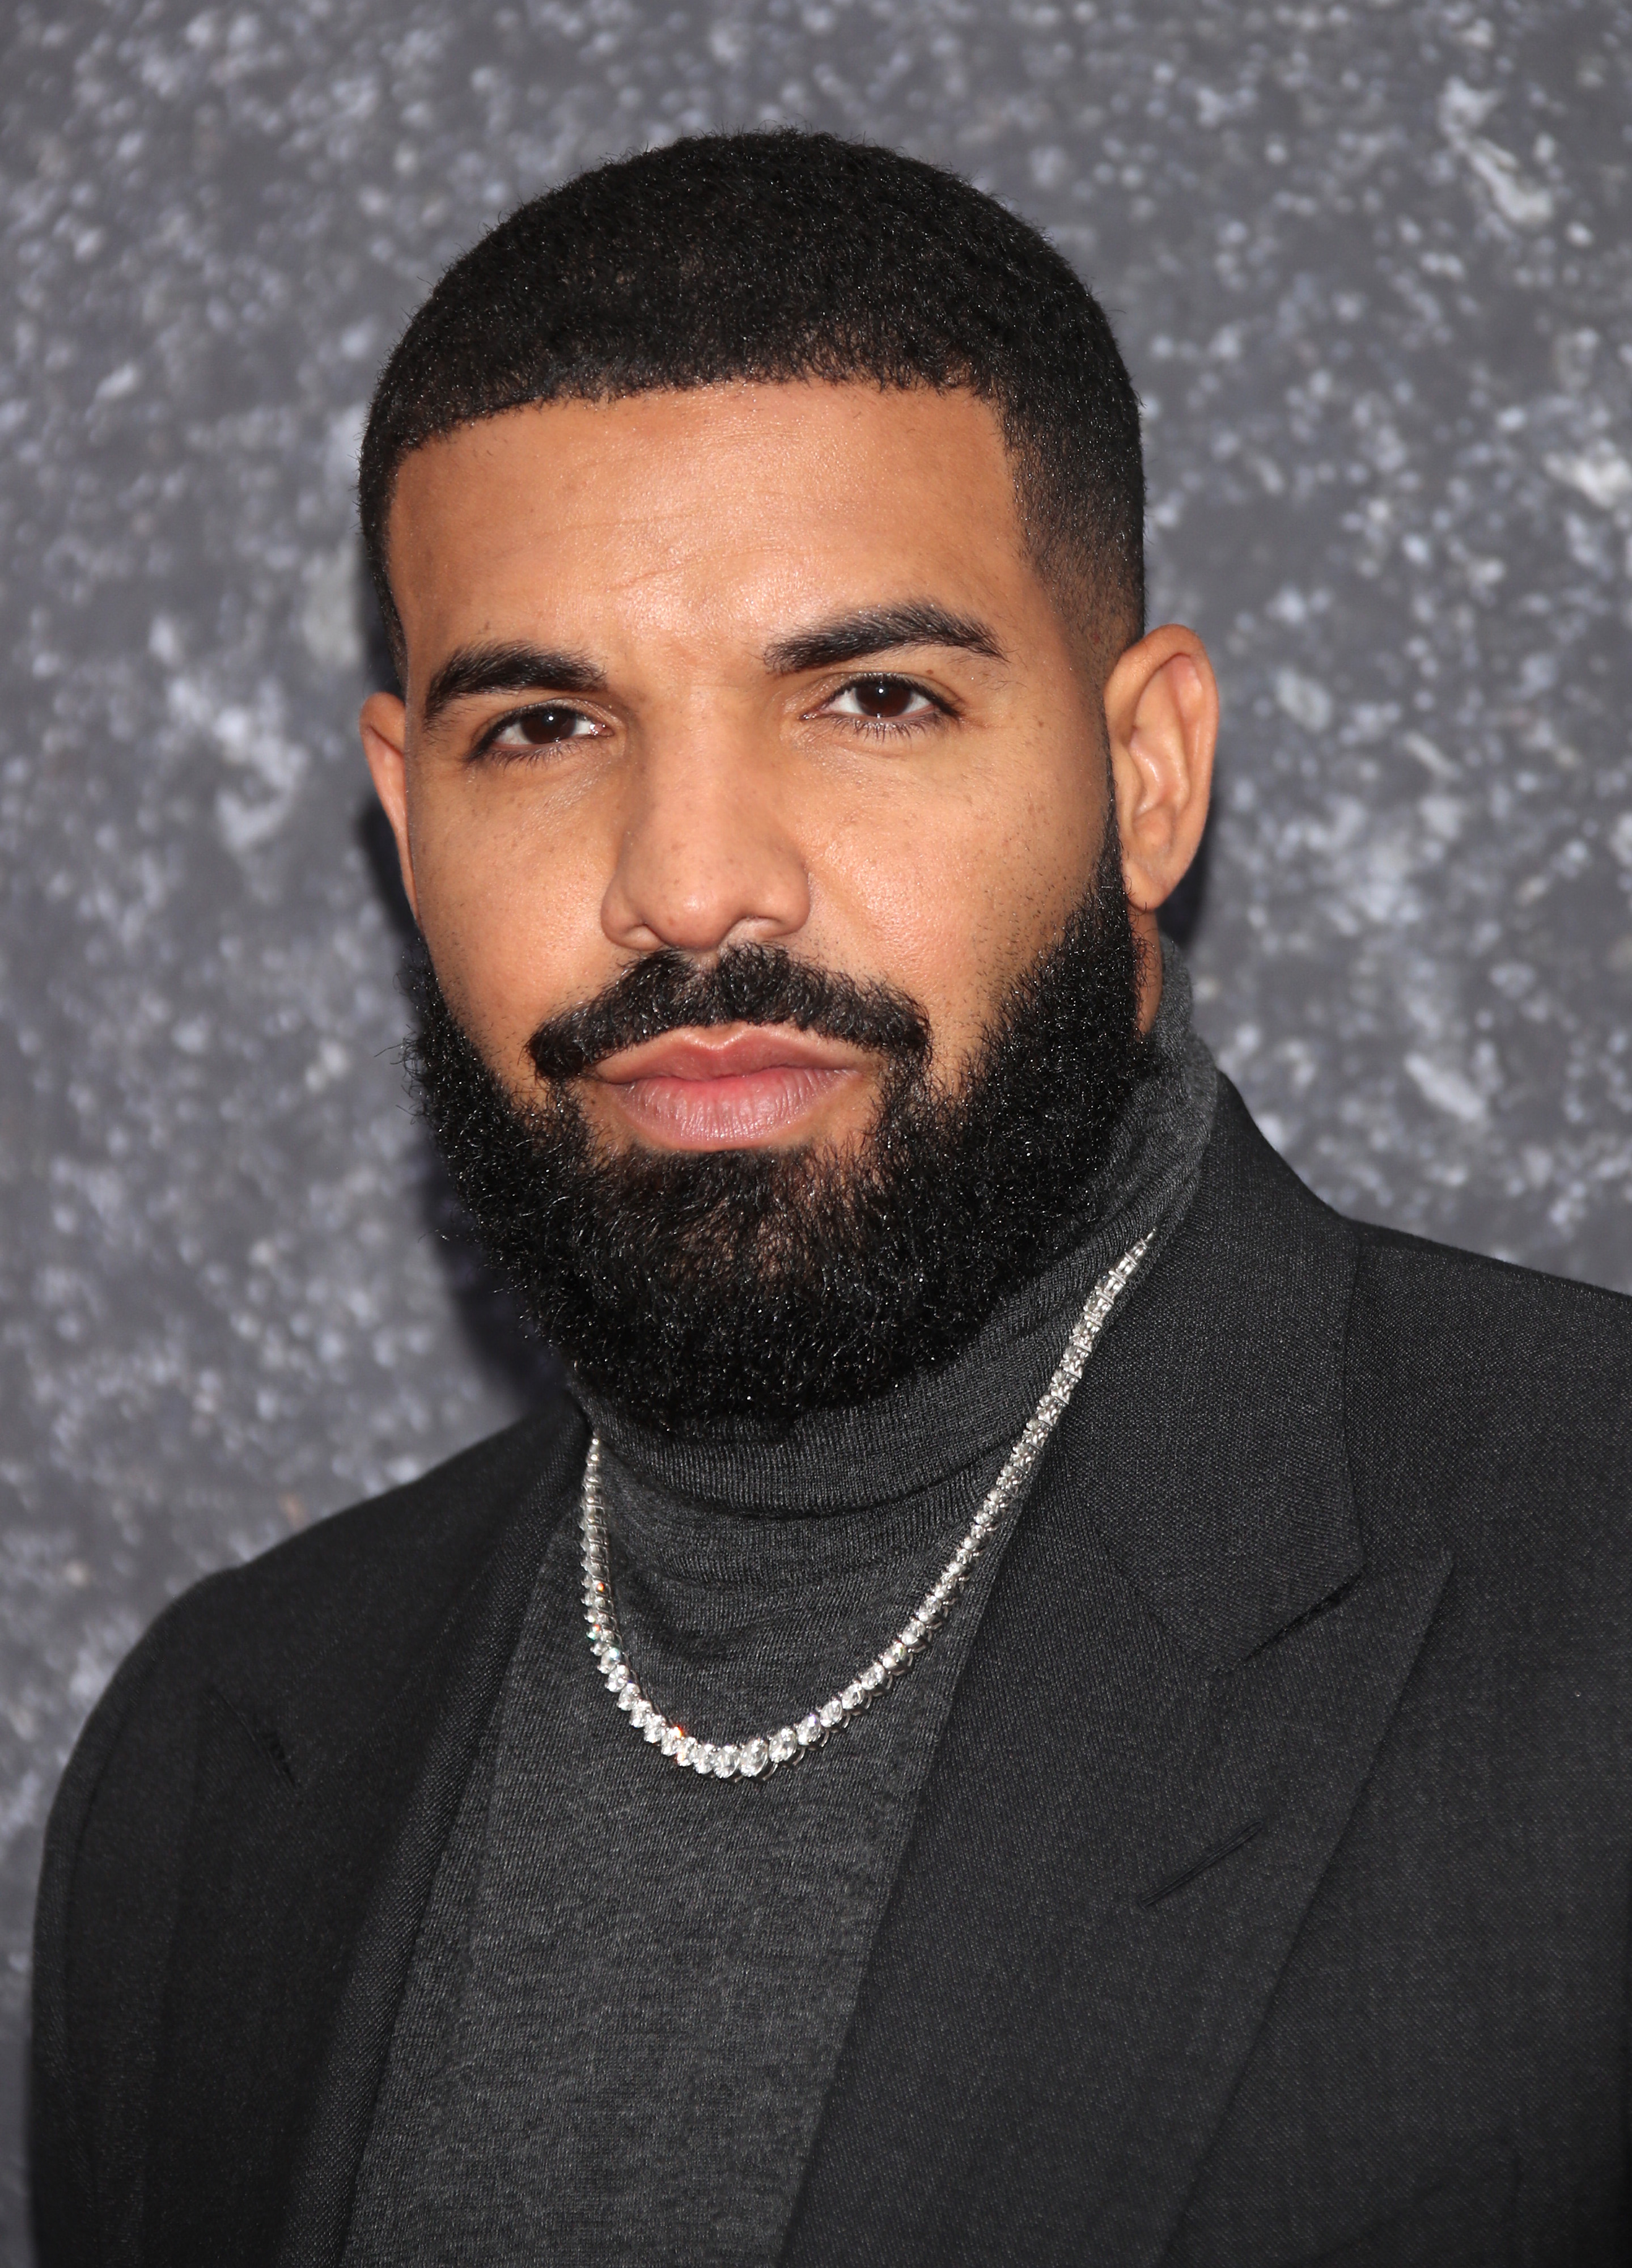 Drake recently shocked fans when he vowed to pay off a fan's late mother's house